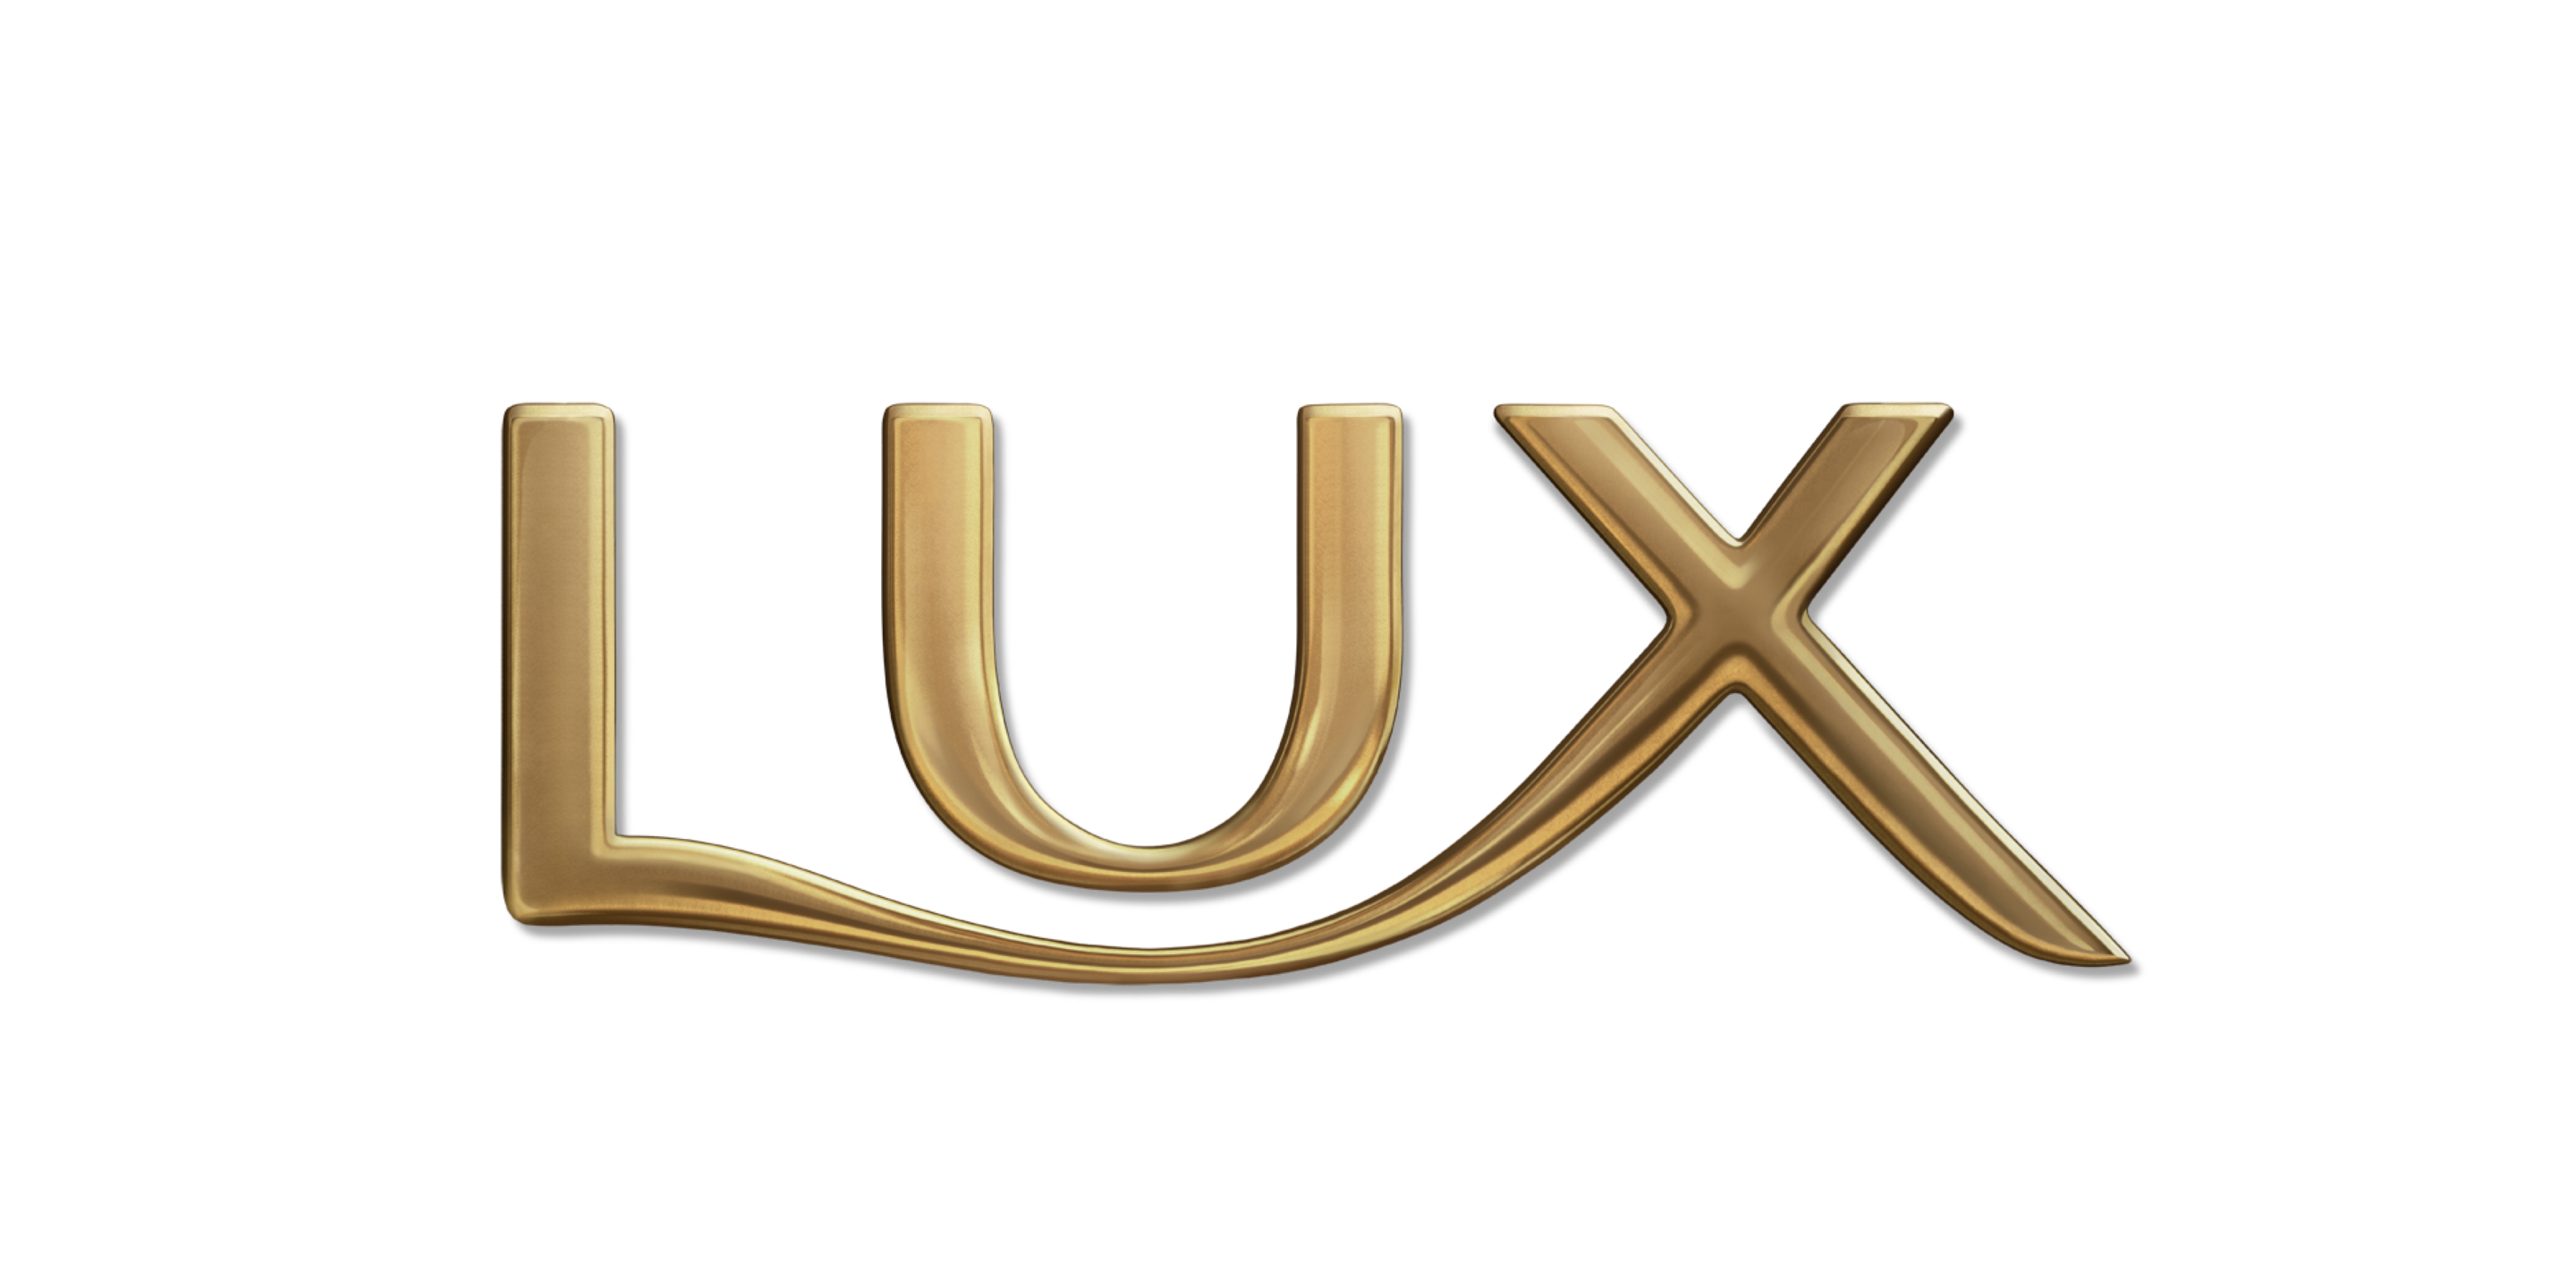 Prize - Lux Hampers